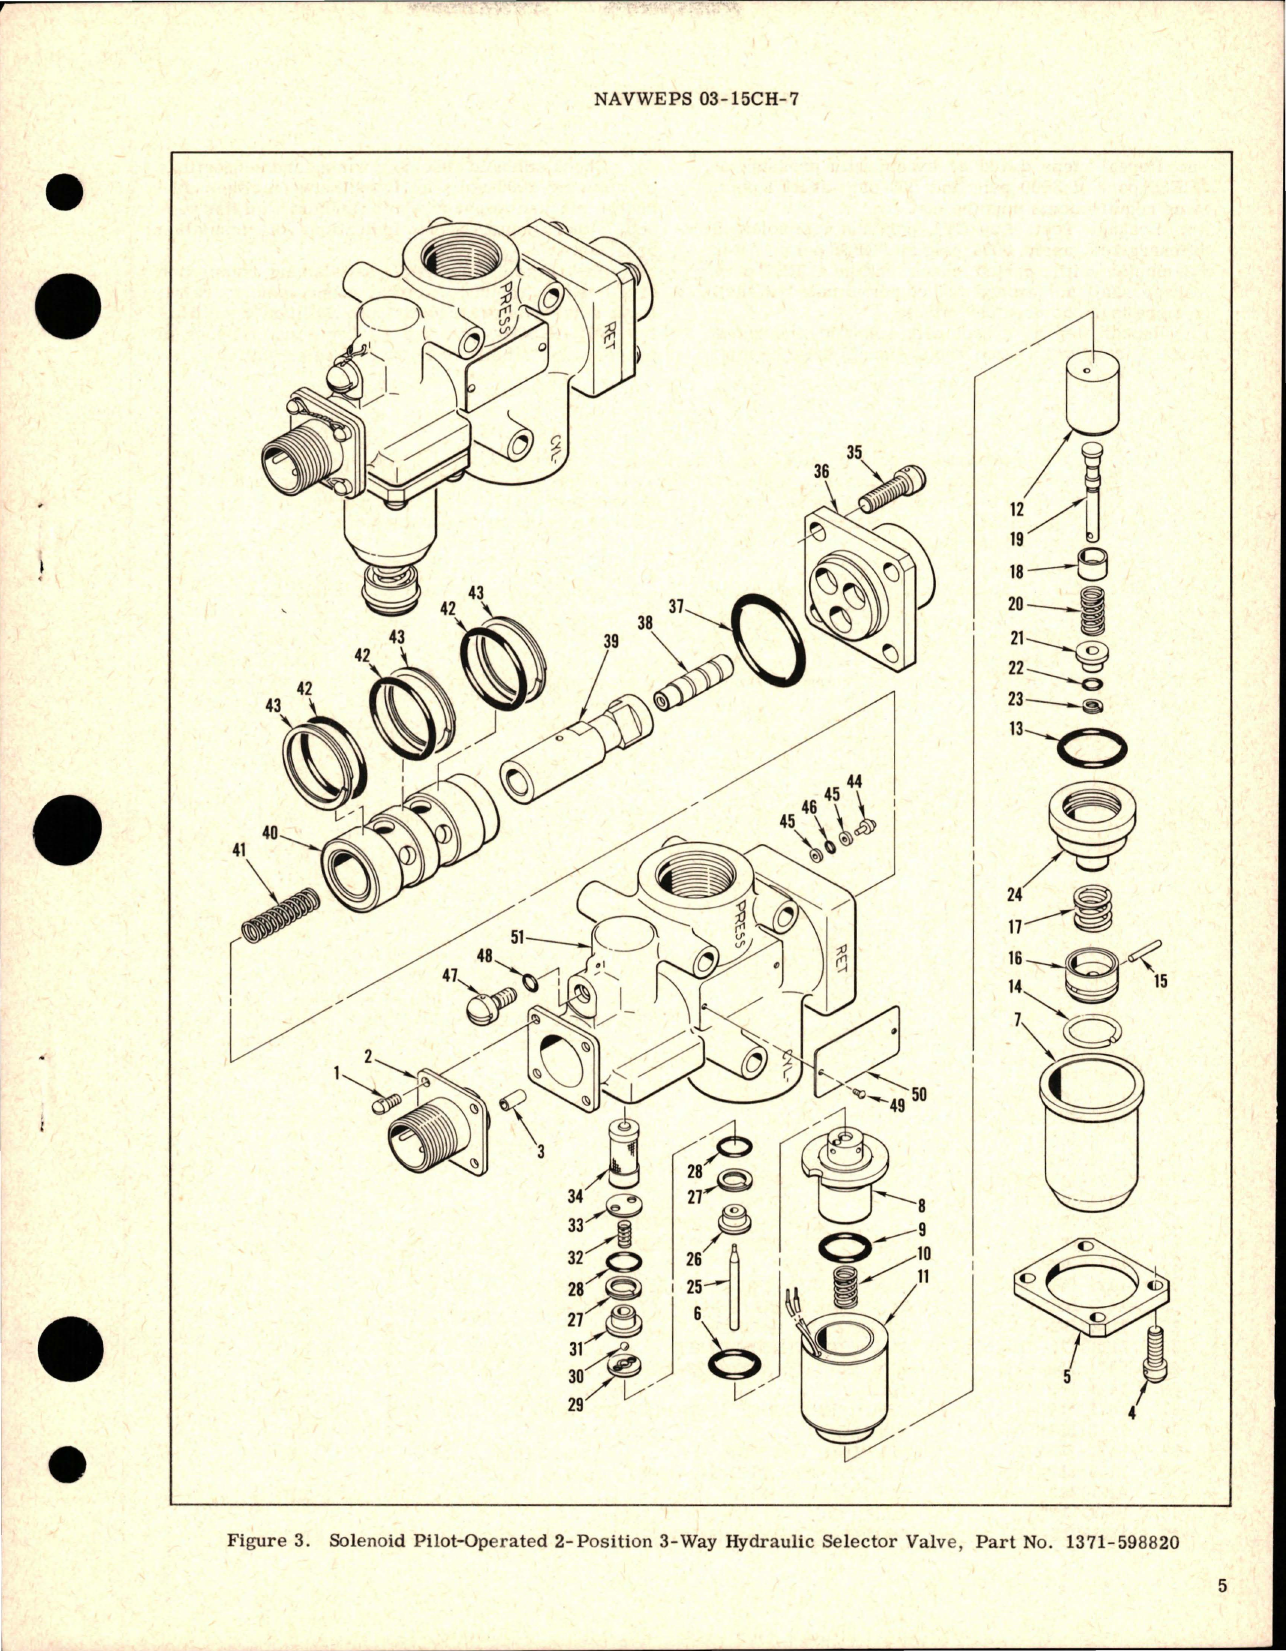 Sample page 5 from AirCorps Library document: Overhaul Instructions with Parts Breakdown for Solenoid Pilot Operated 2 Position 3 way Hydraulic Selector Valve - Part 1371-598820